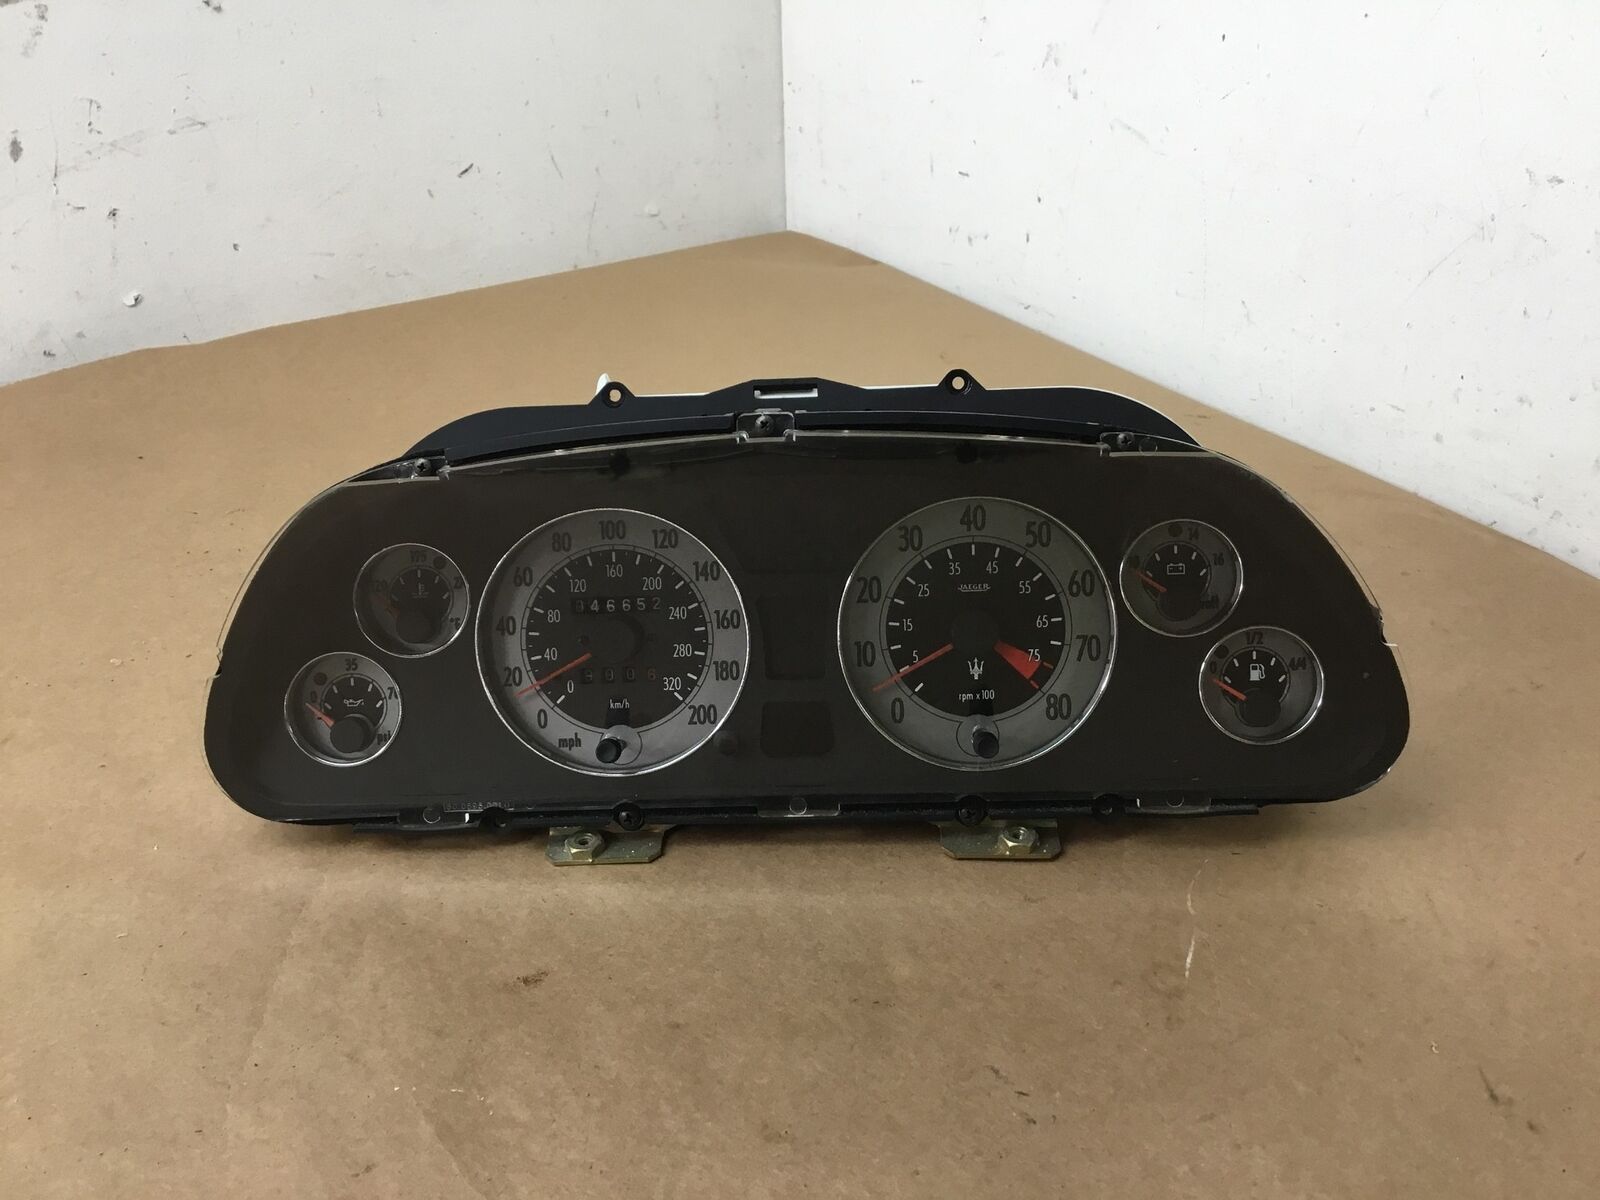 Maserati Coupe GT 2003 Dashboard Speedometer Instrument Cluster Gauge 02-06 :A